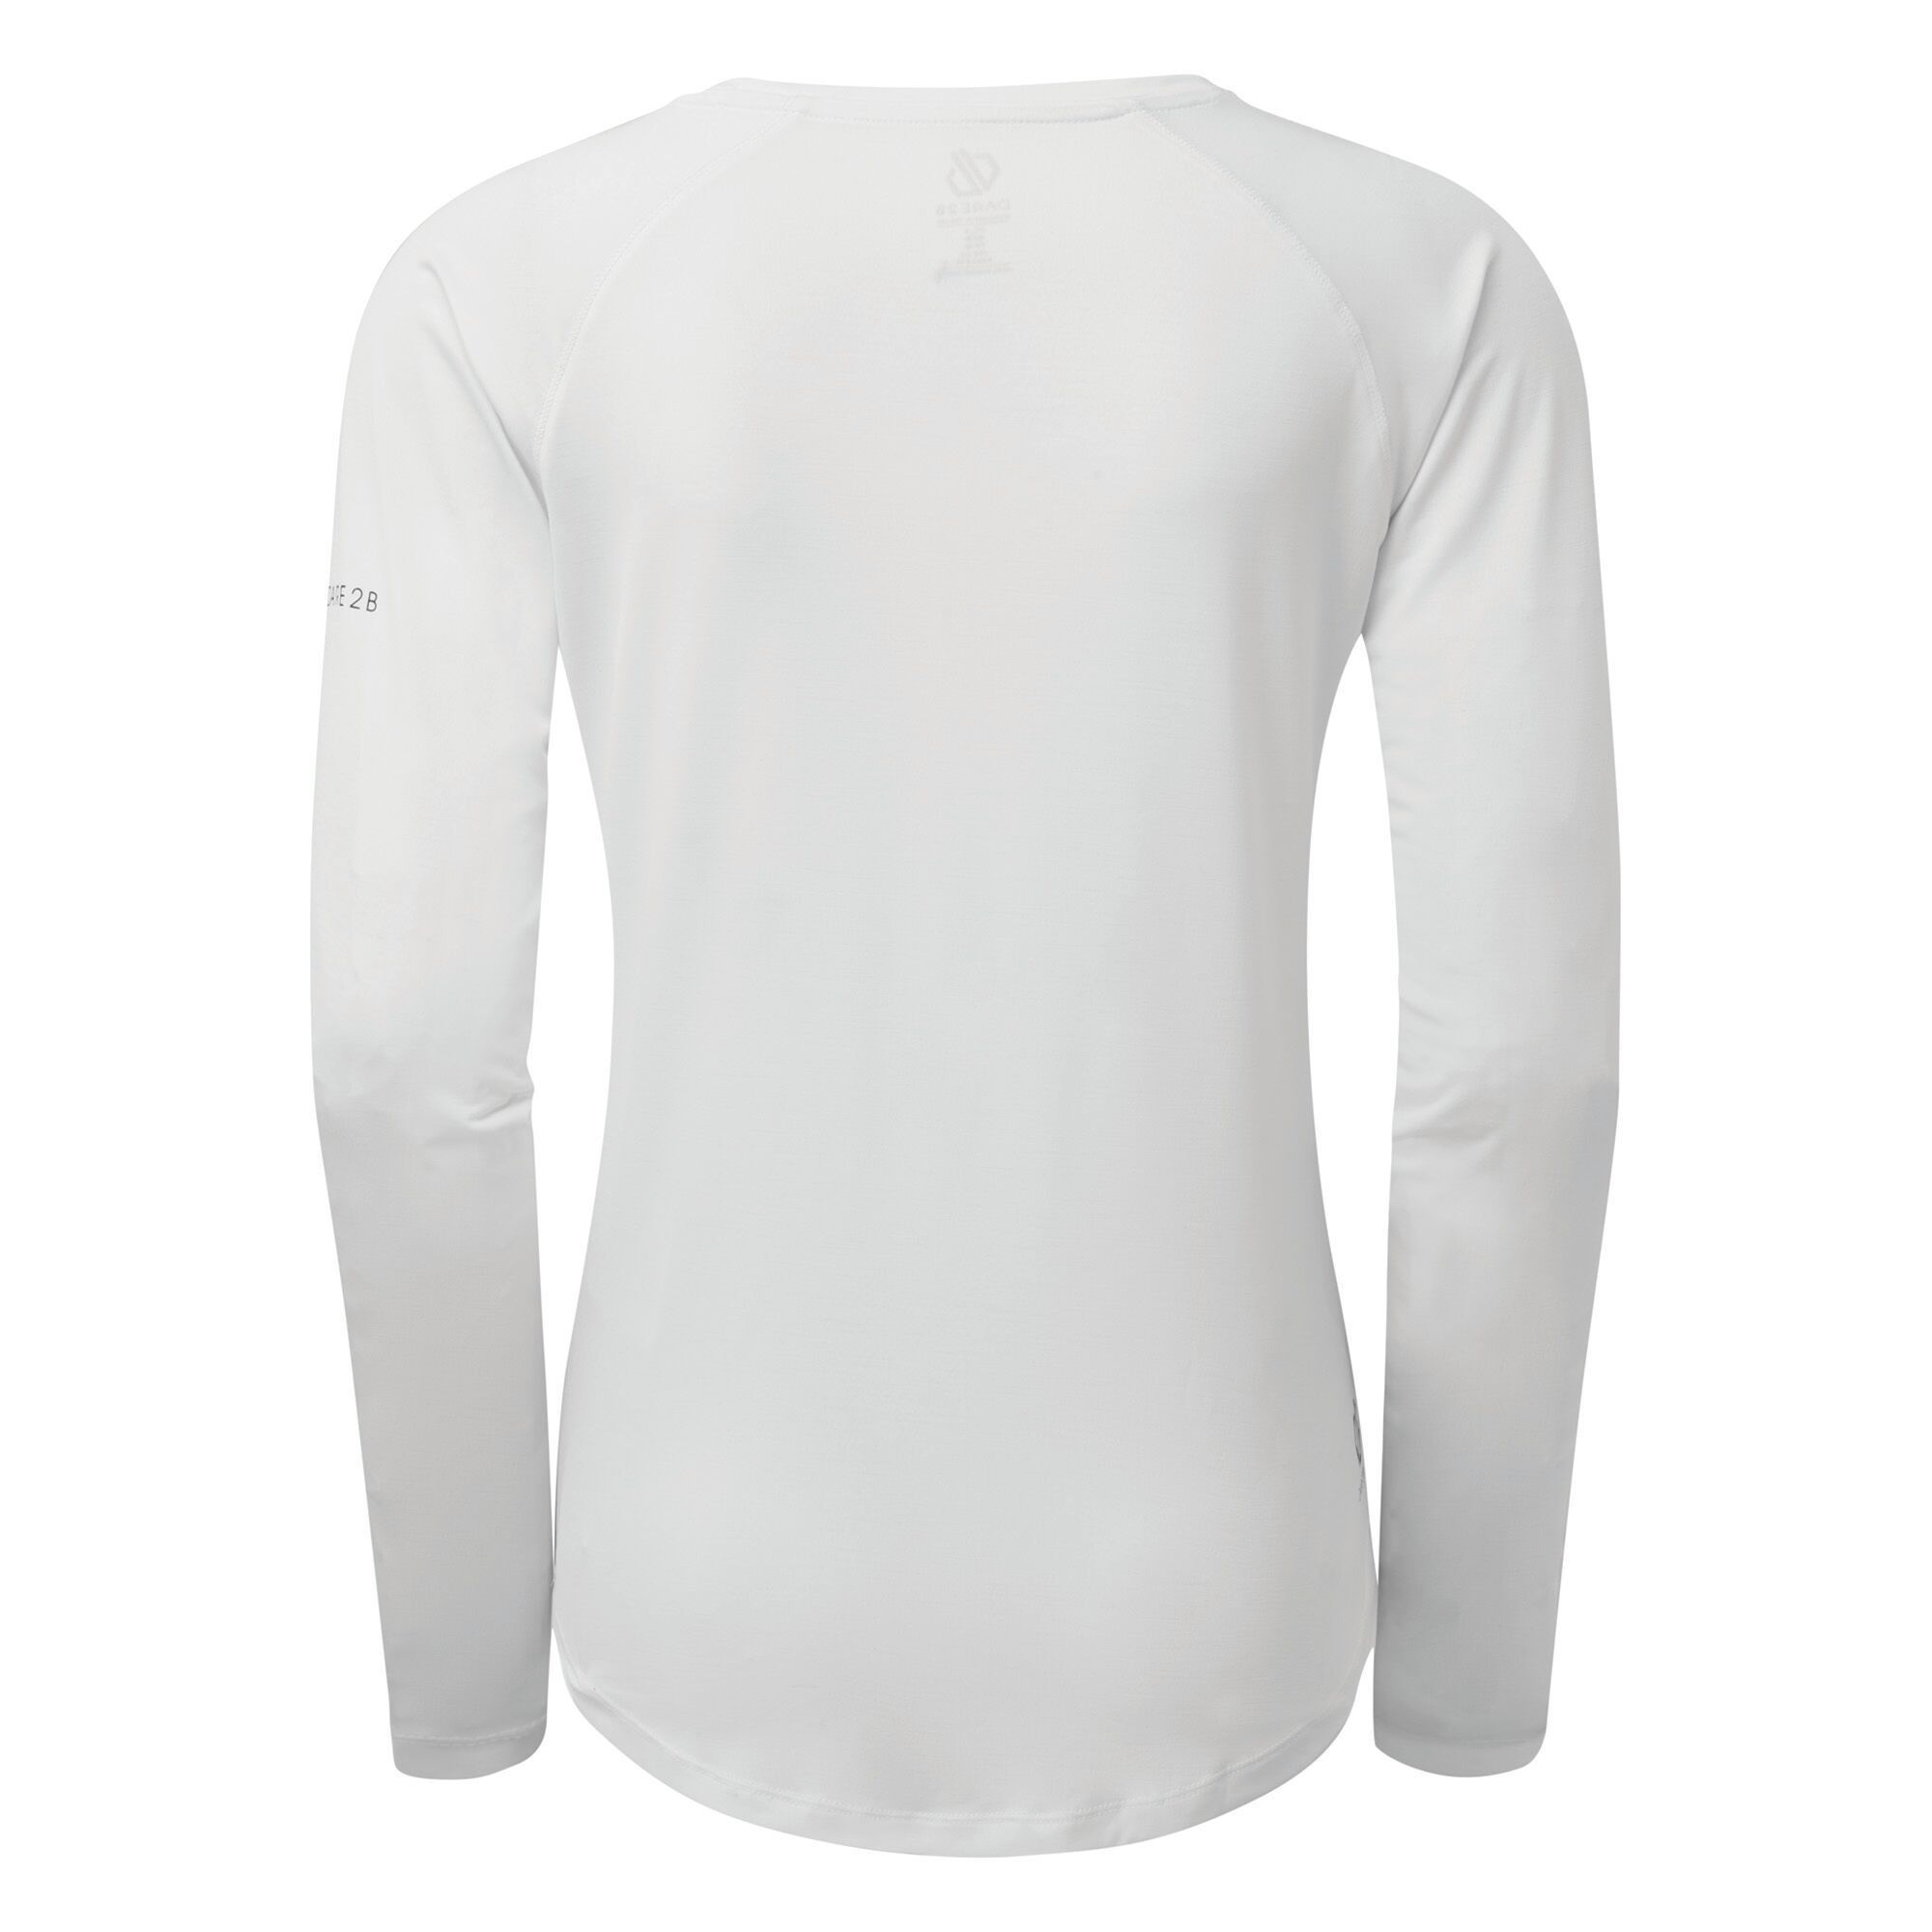 Material: 90% Polyester (Q-Wic Plus lightweight polyester), 10% Elastane. Supremely soft and light-to-wear long-sleeved, v-neck workout t-shirt. Fabric provides UPF 50+ protection and features anti-bacterial odour control built in.